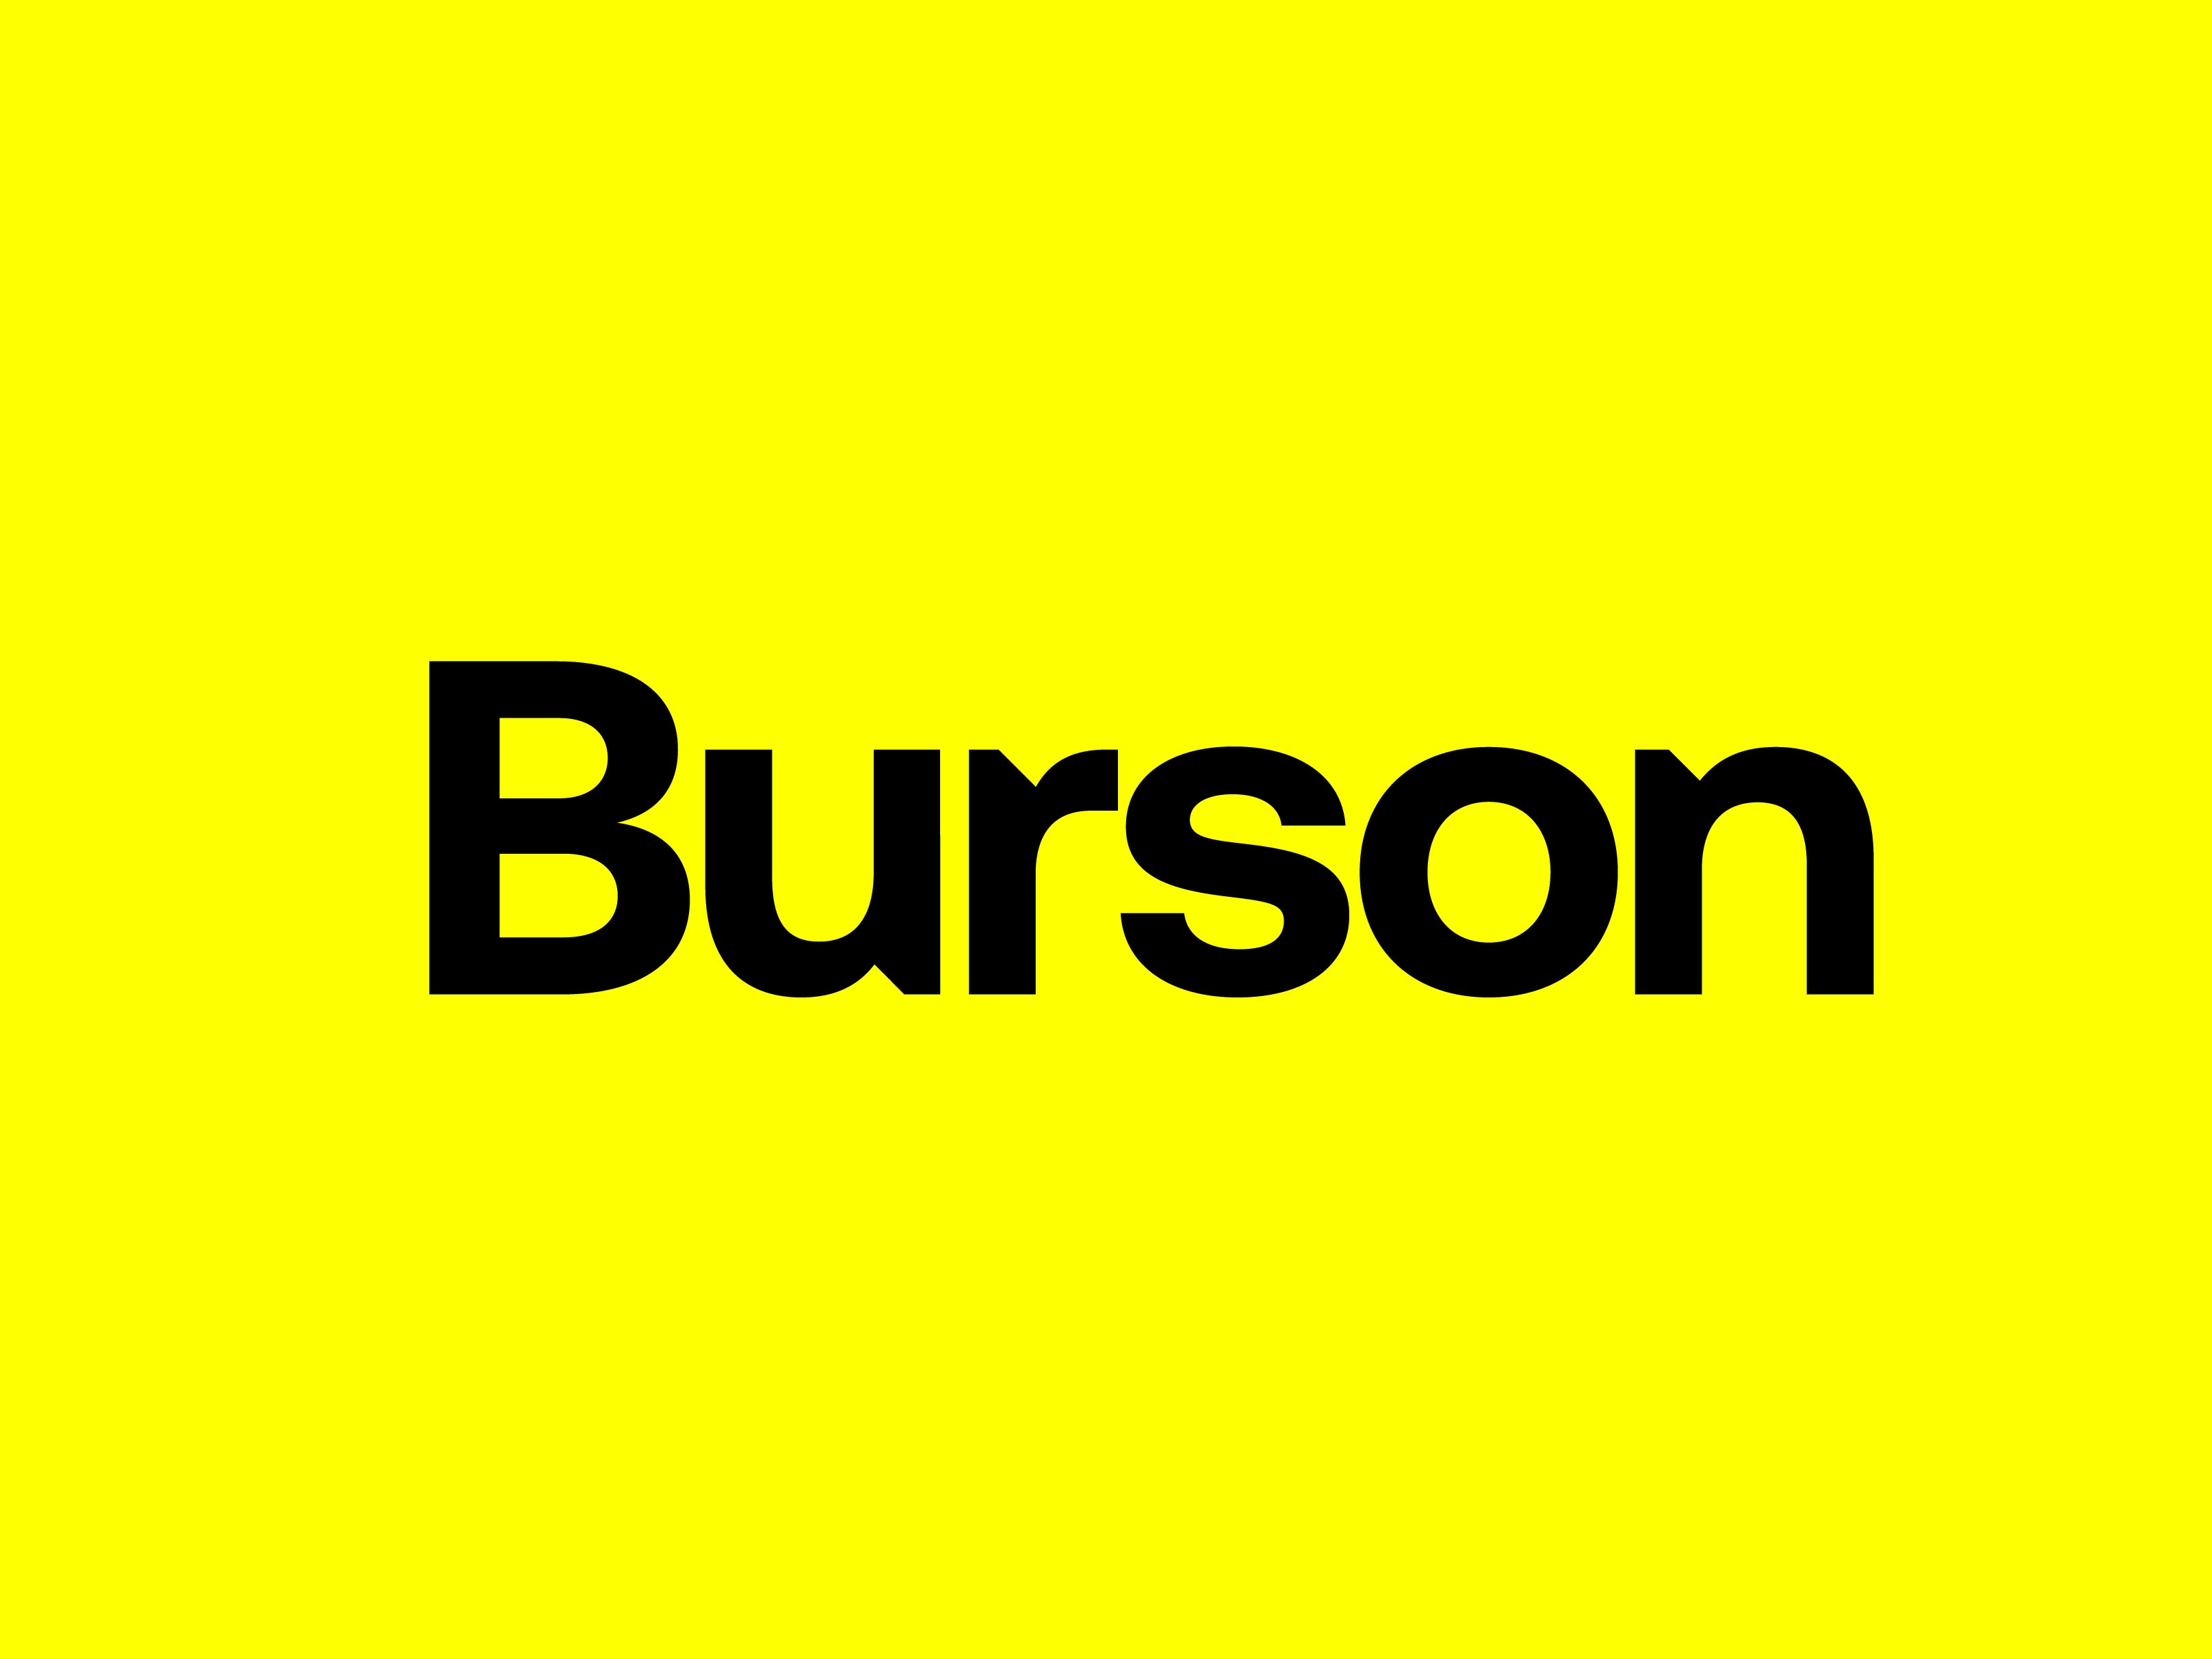 Burson is officially launched